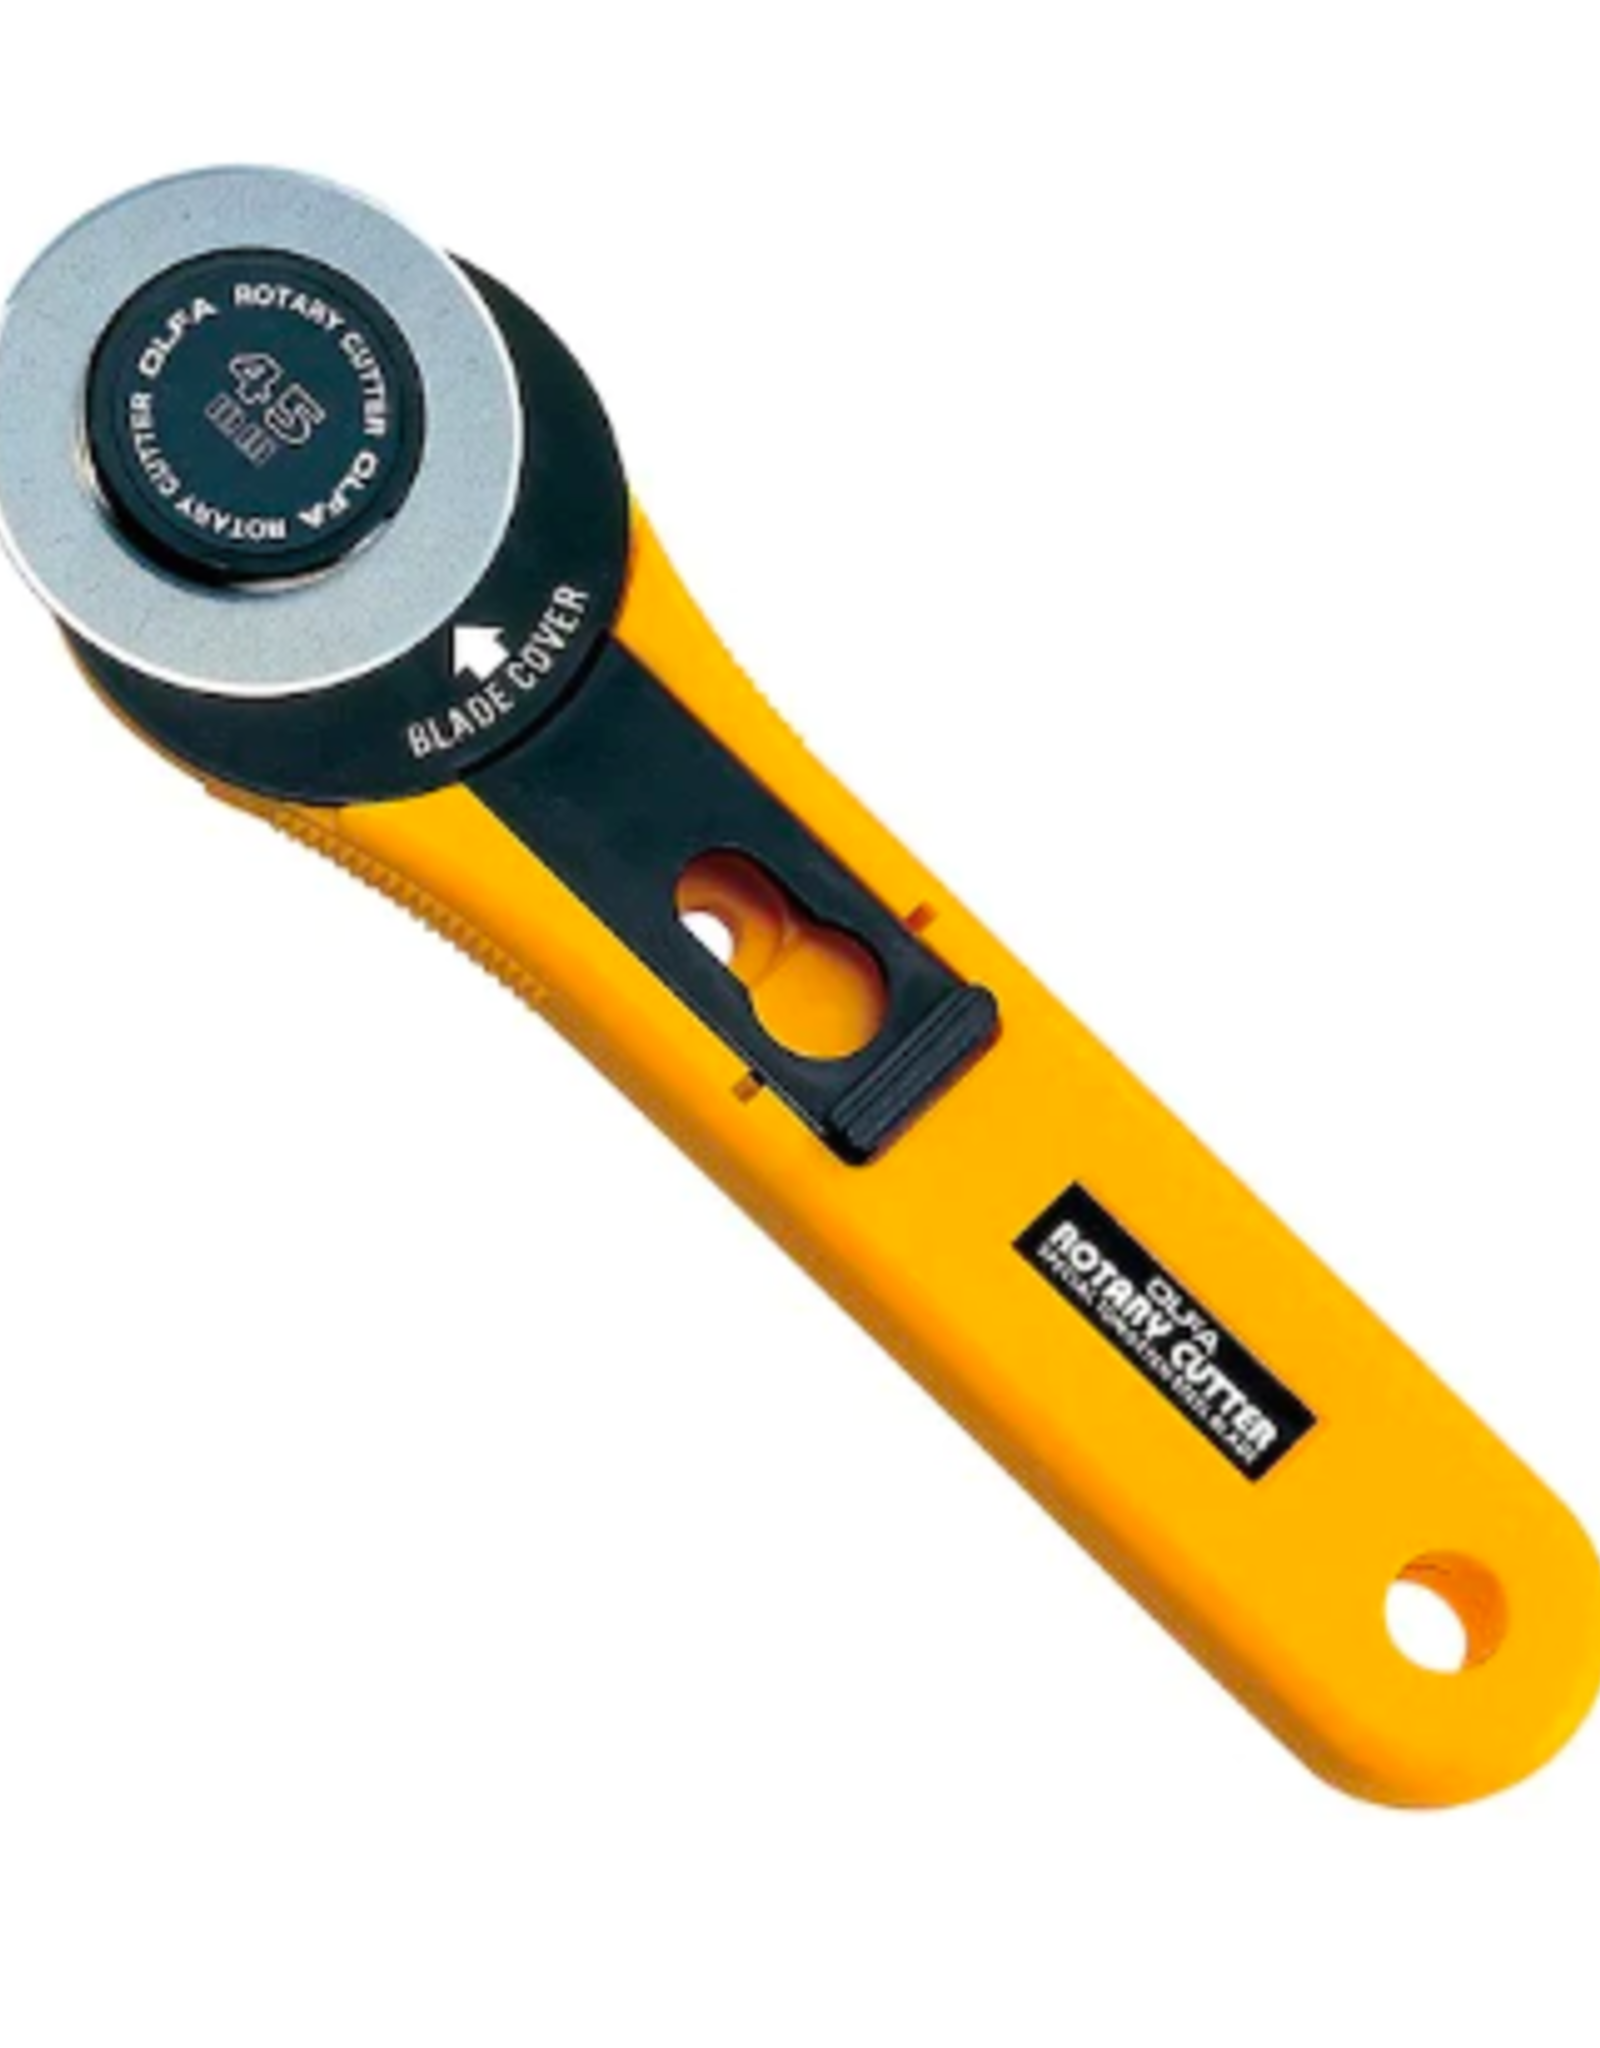 OLFA Quick Change Rotary Cutter-45mm